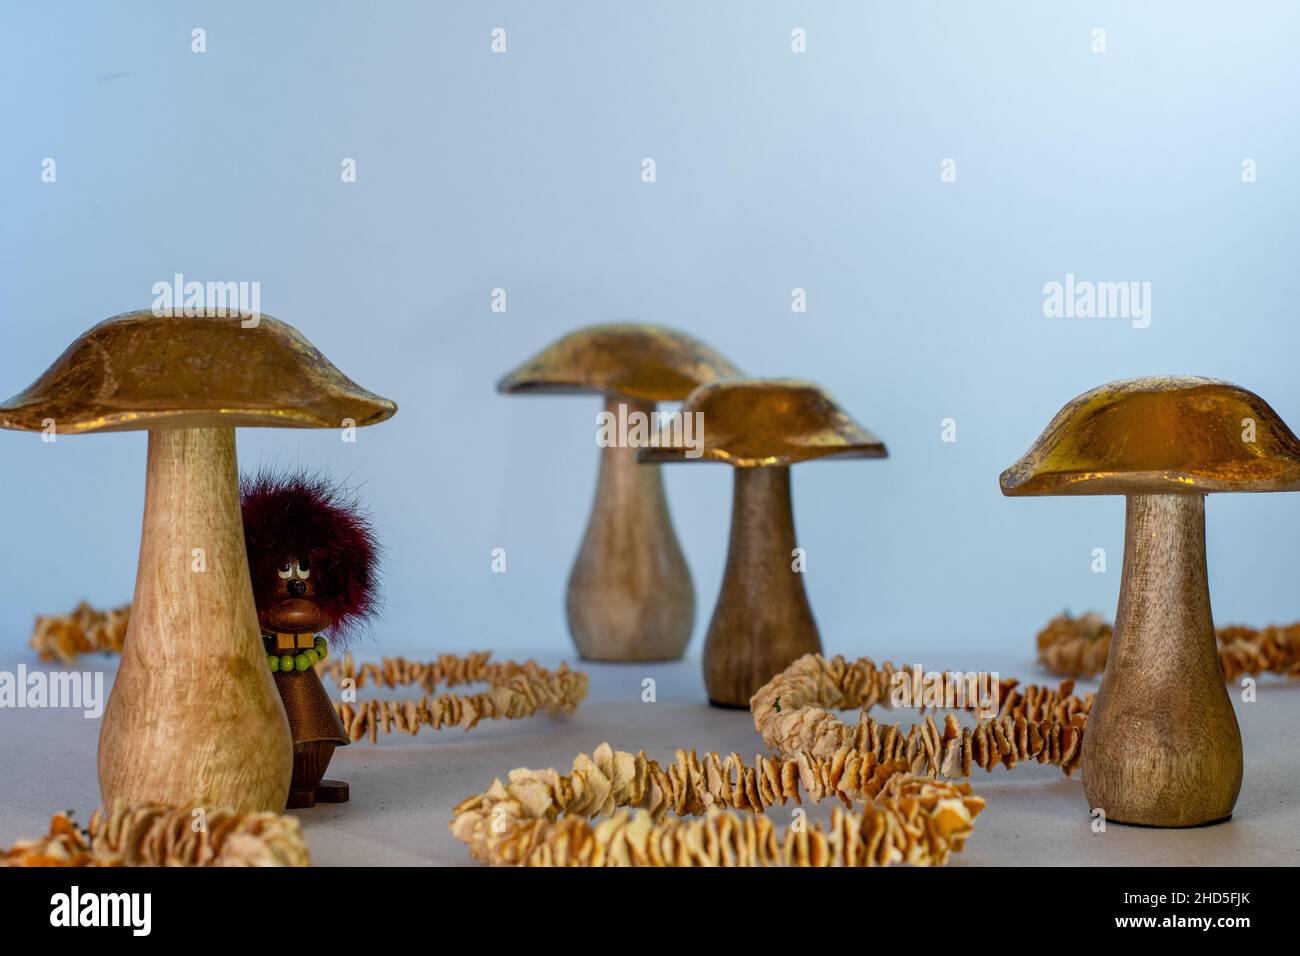 Toy with felt and golden wooden mushroom Stock Photo